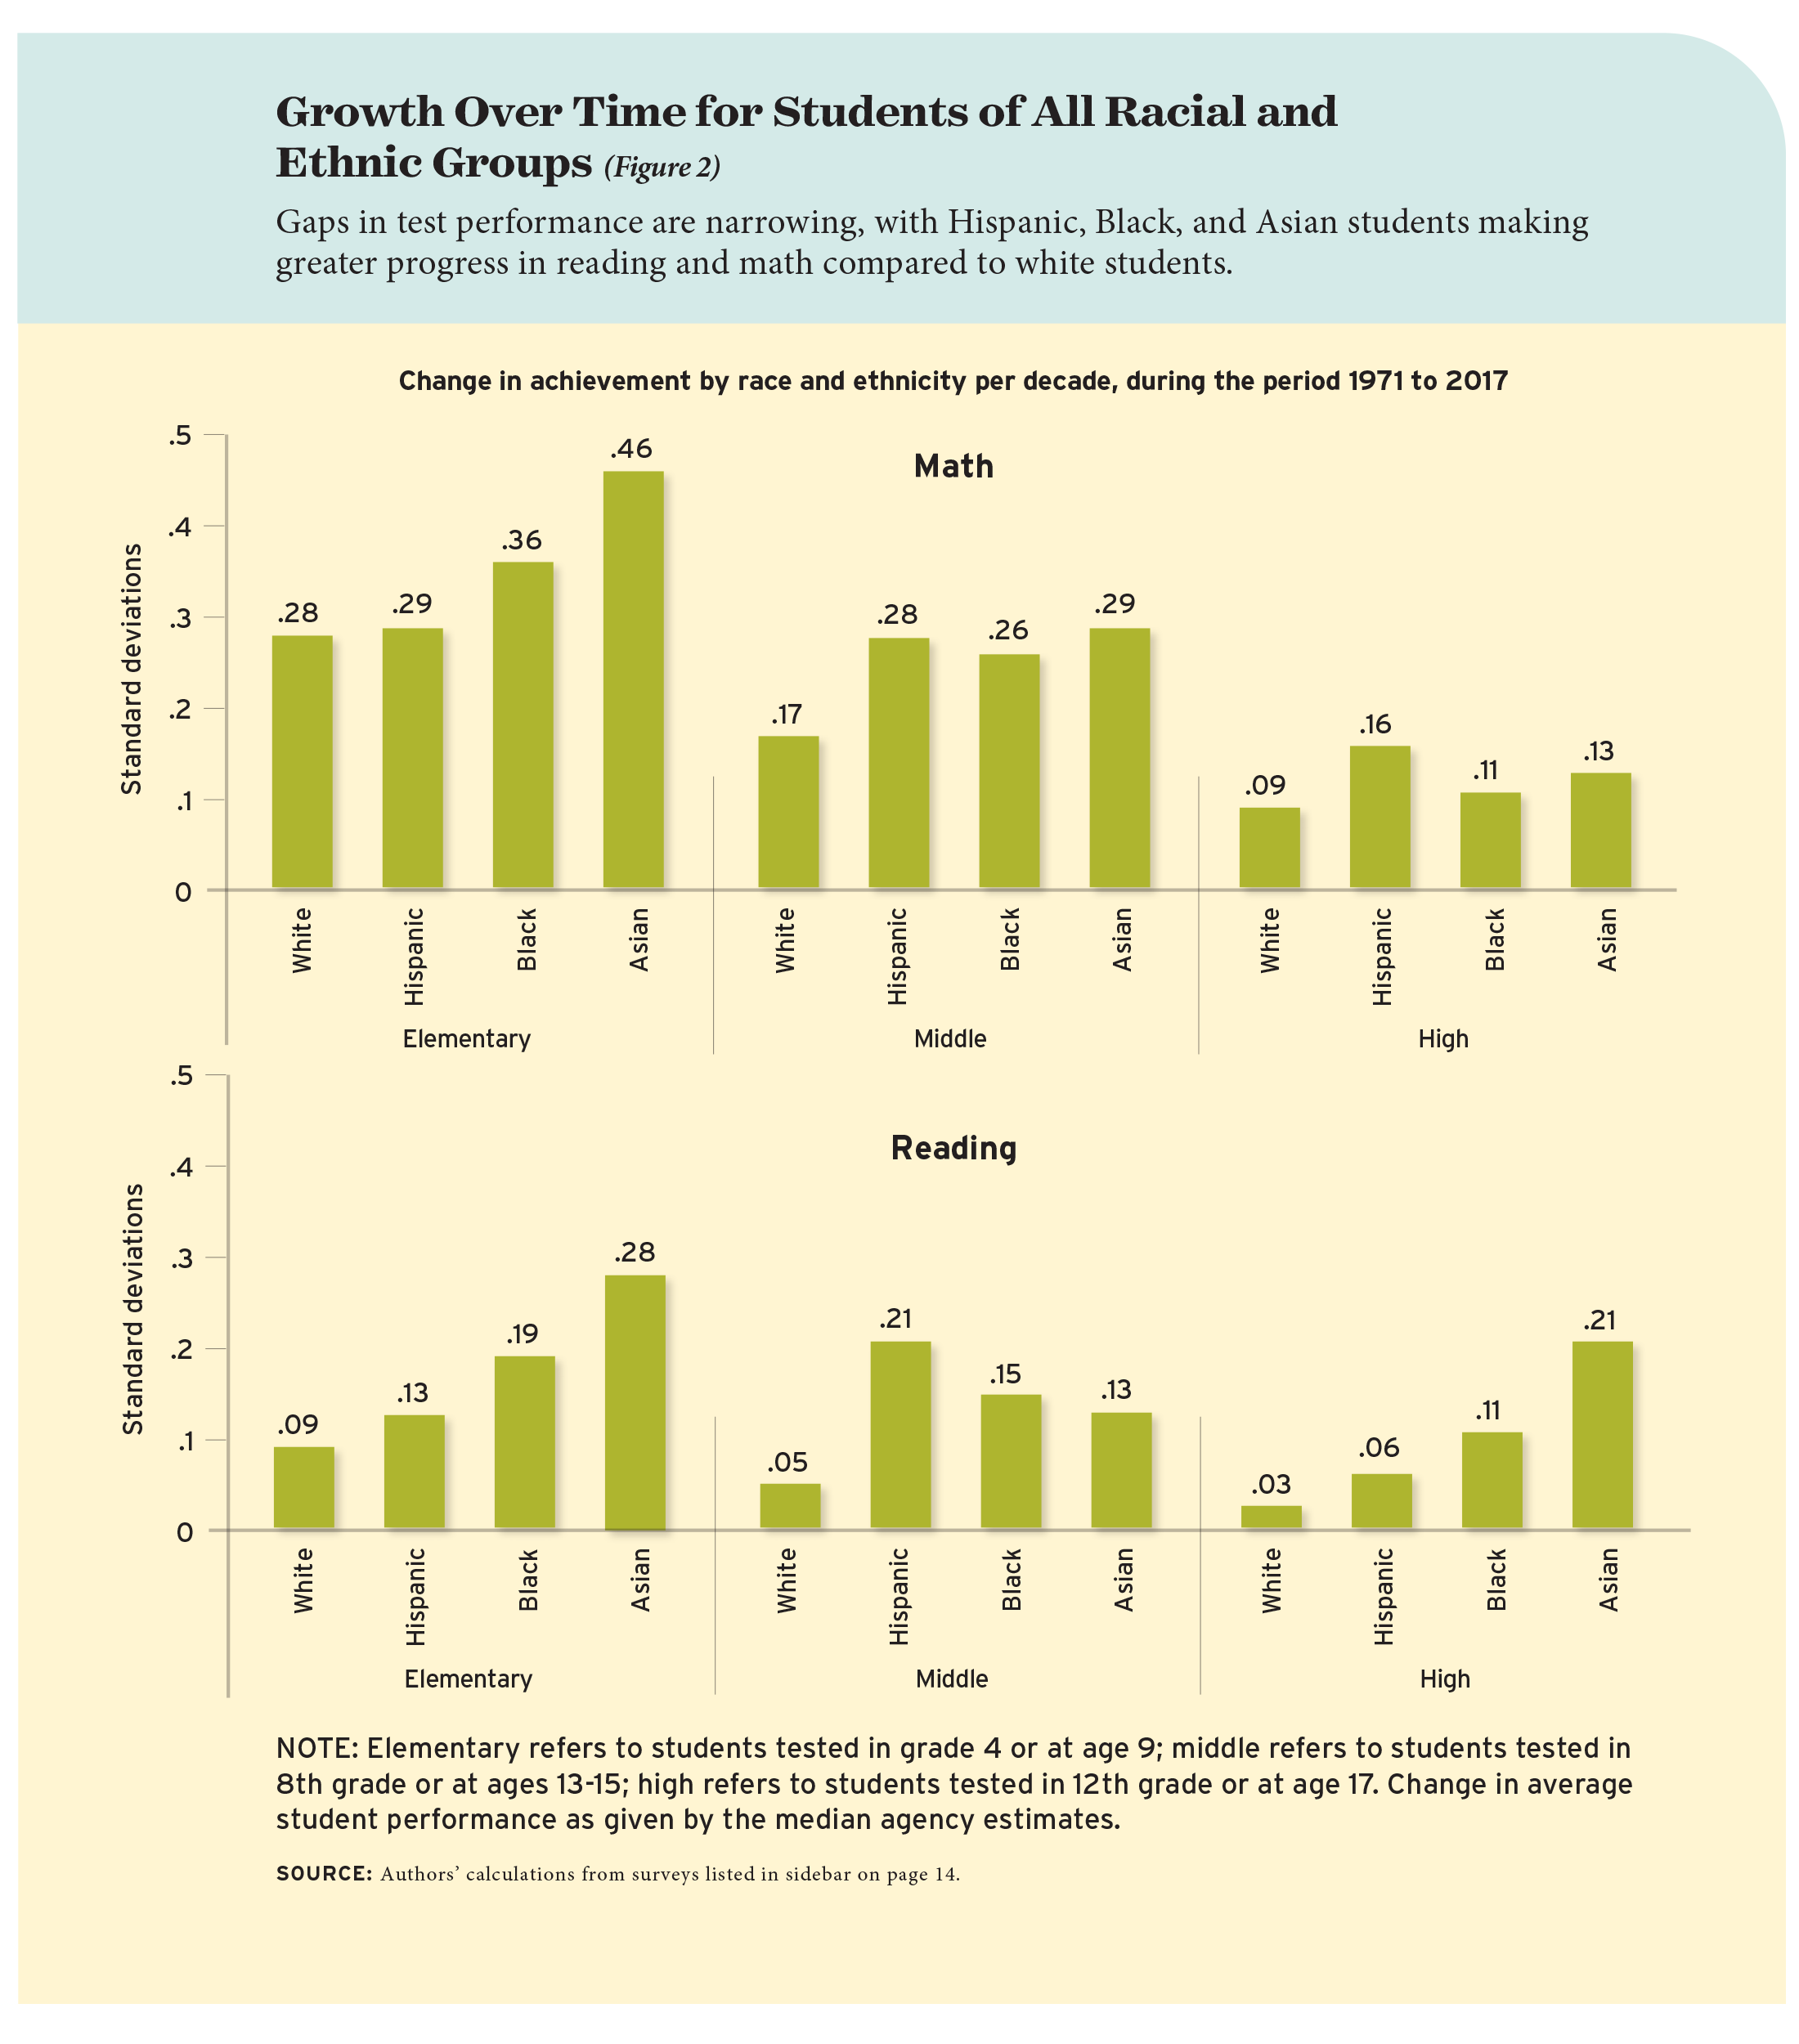 Growth Over Time for Students of All Racial and Ethnic Groups (Figure 2)